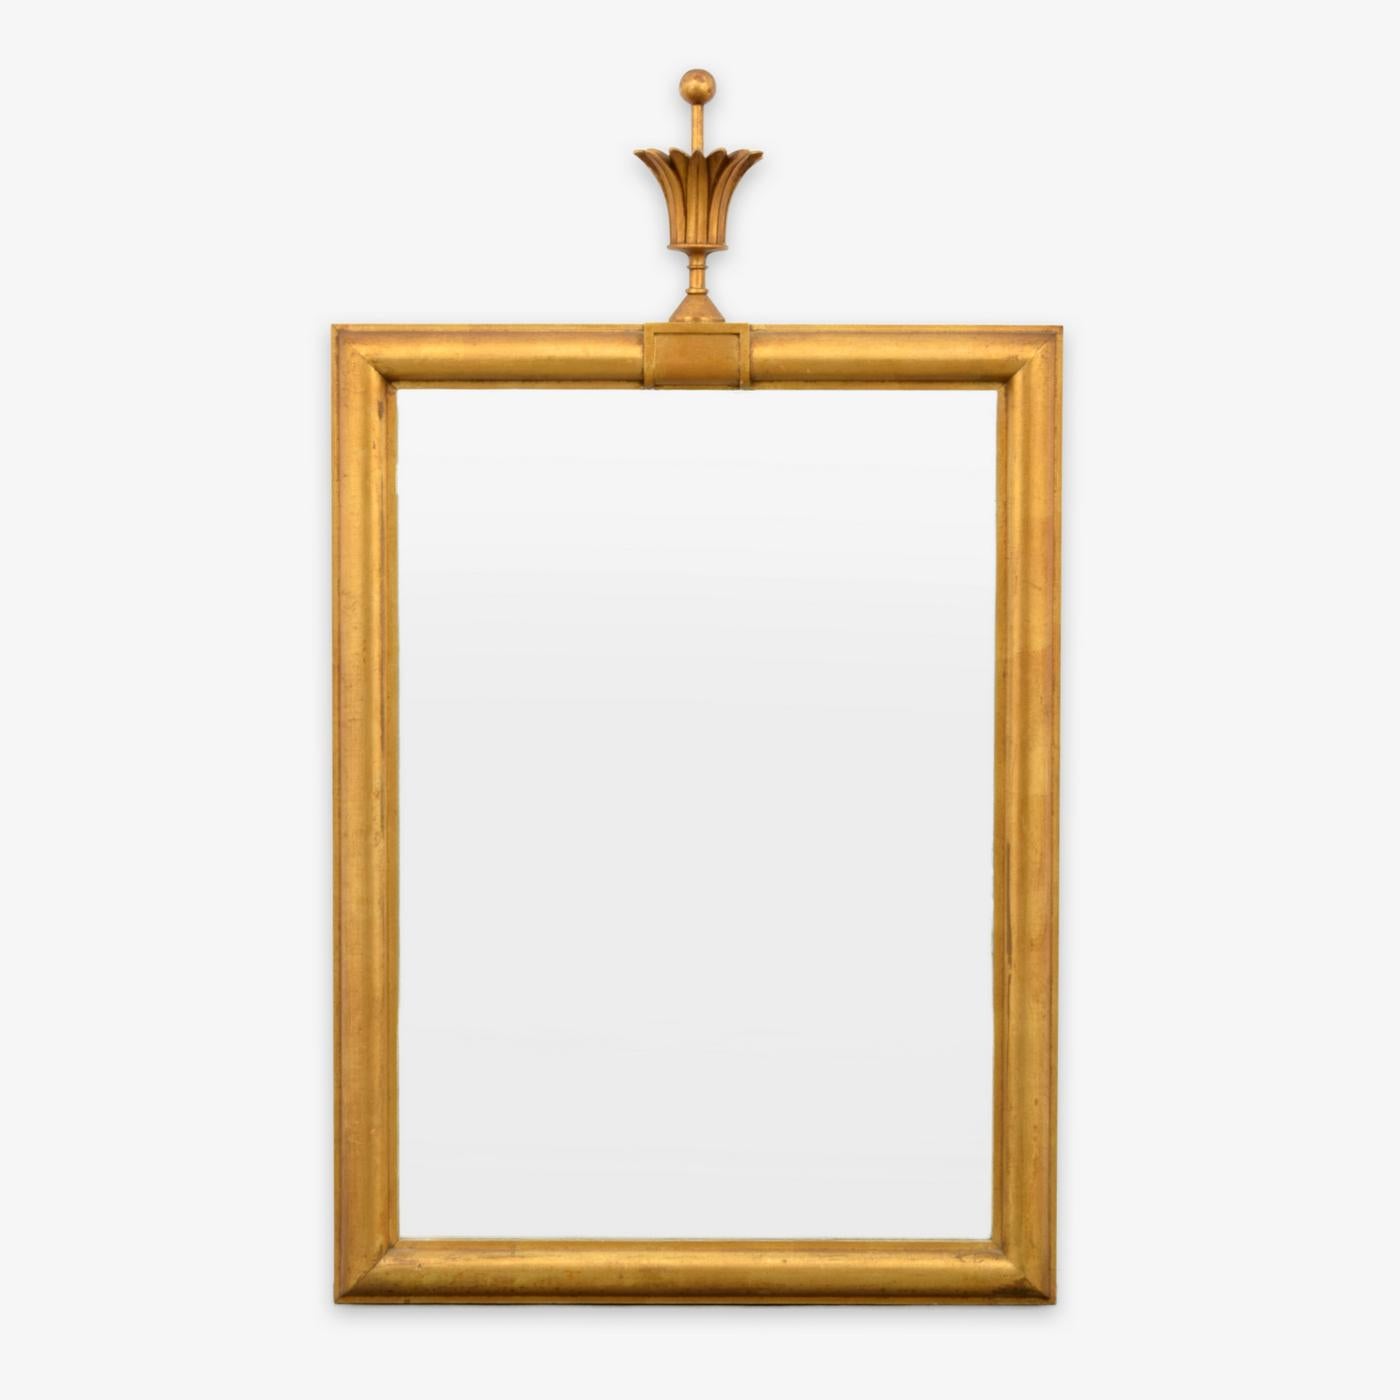 Gold mirror with finial on top attributed to Tommi Parzinger.

Tommi Parzinger's meticulous detail in his early work as a silversmith was carried over into his design career.  He favored costly materials that allowed him to achieve a luxurious and